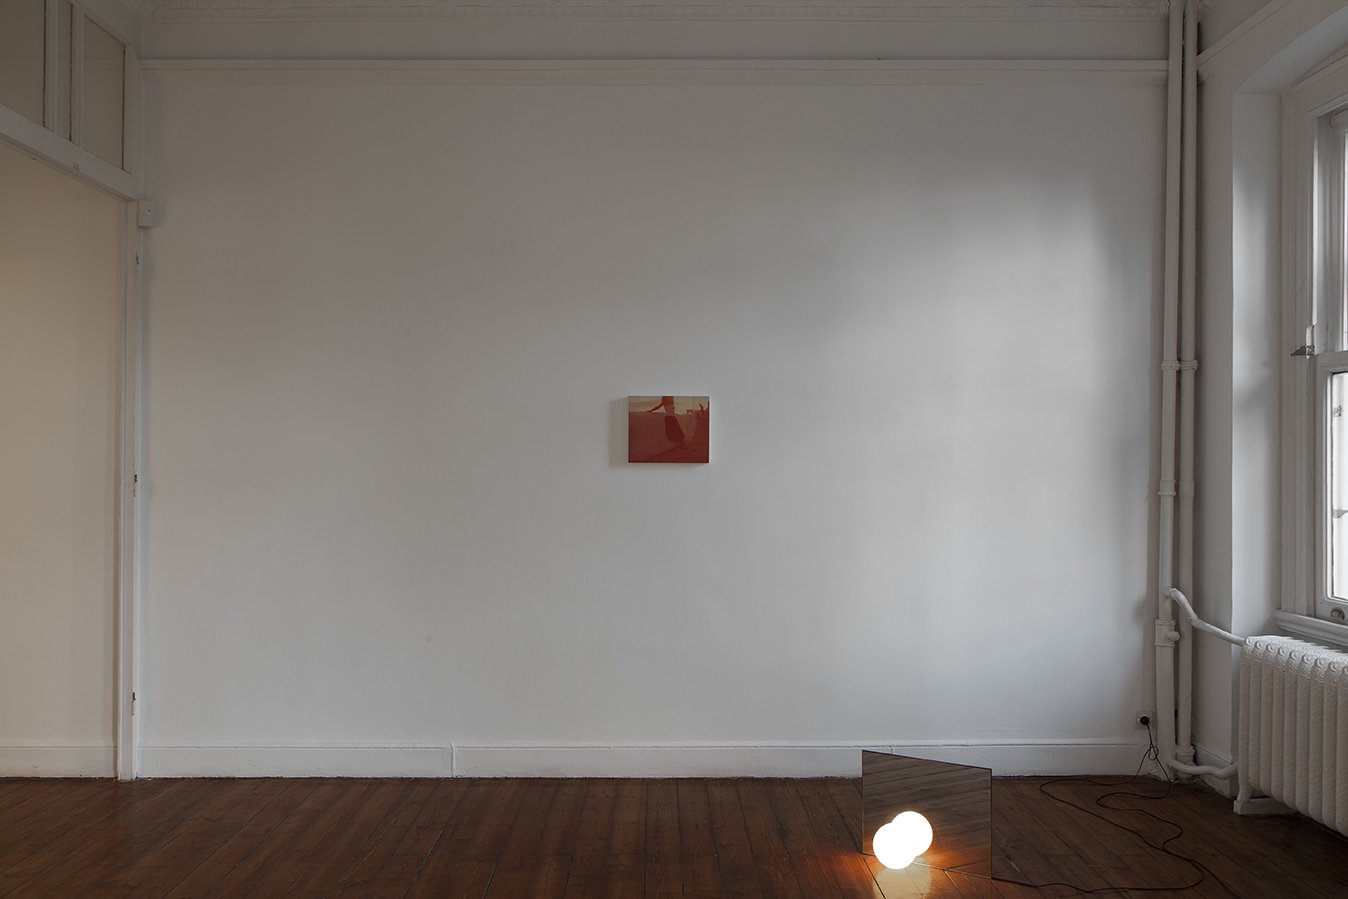 Eftihis Patsourakis, Headless, oil on wood, 29 x 35.3 cm (11 1/2 x 14 in), 2014. Installation view, Doings on Time and Light, Rodeo, Istanbul, 2014